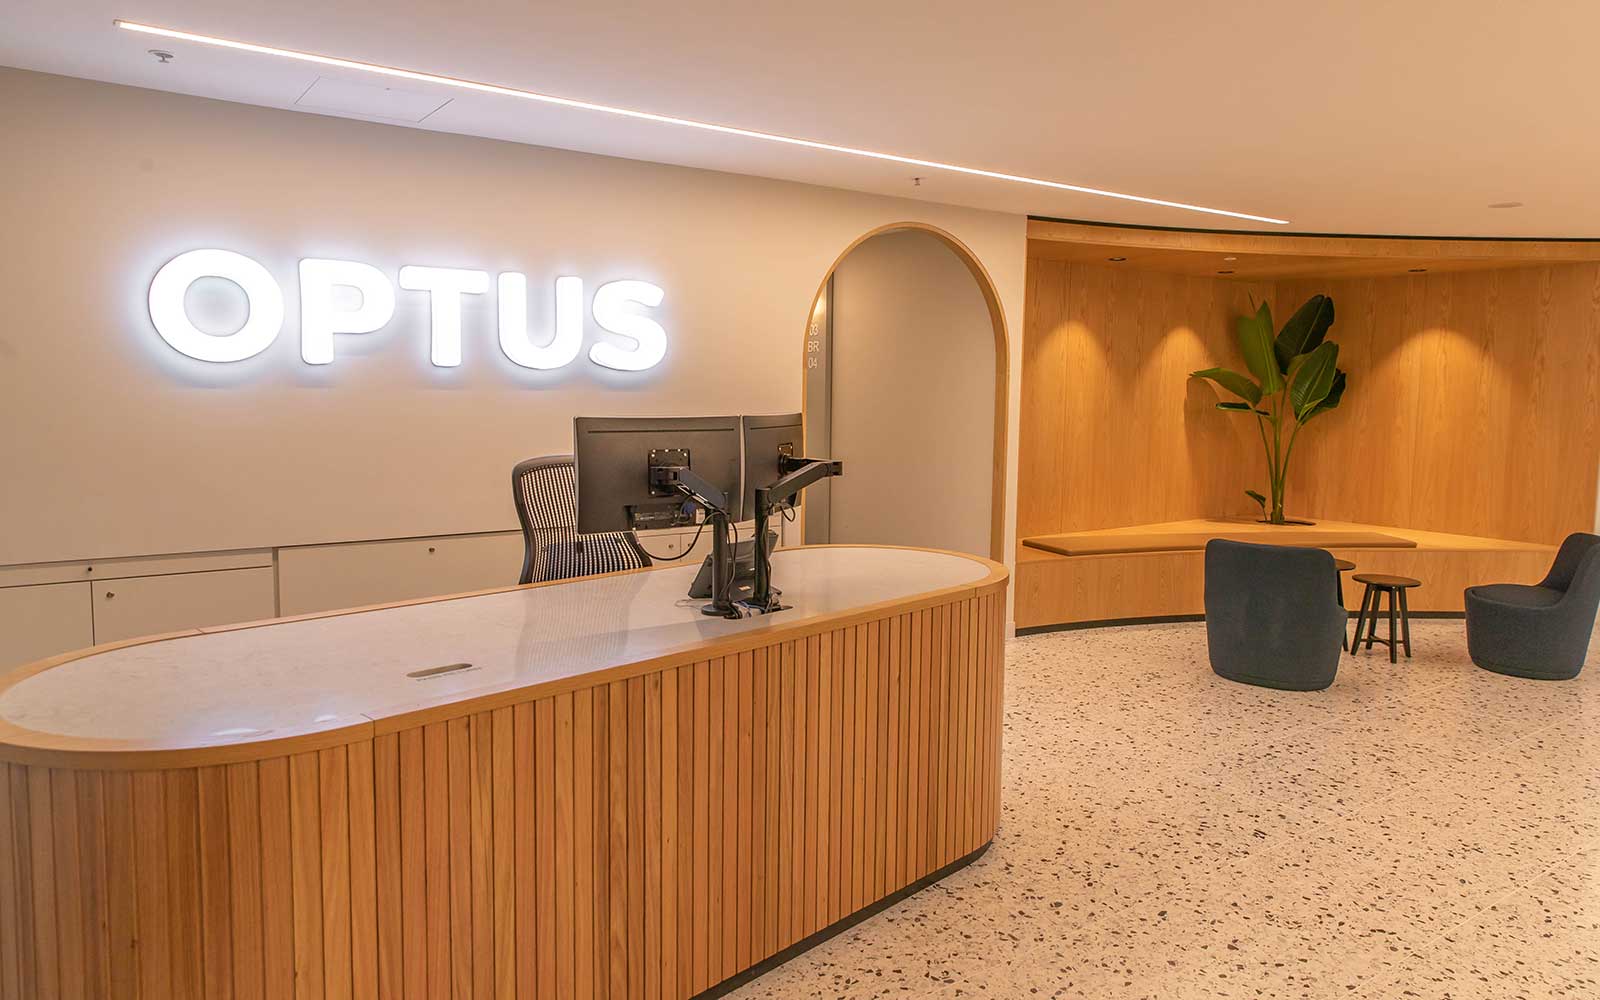 Optus Canberra Commercial Refurbishment, FDC Building